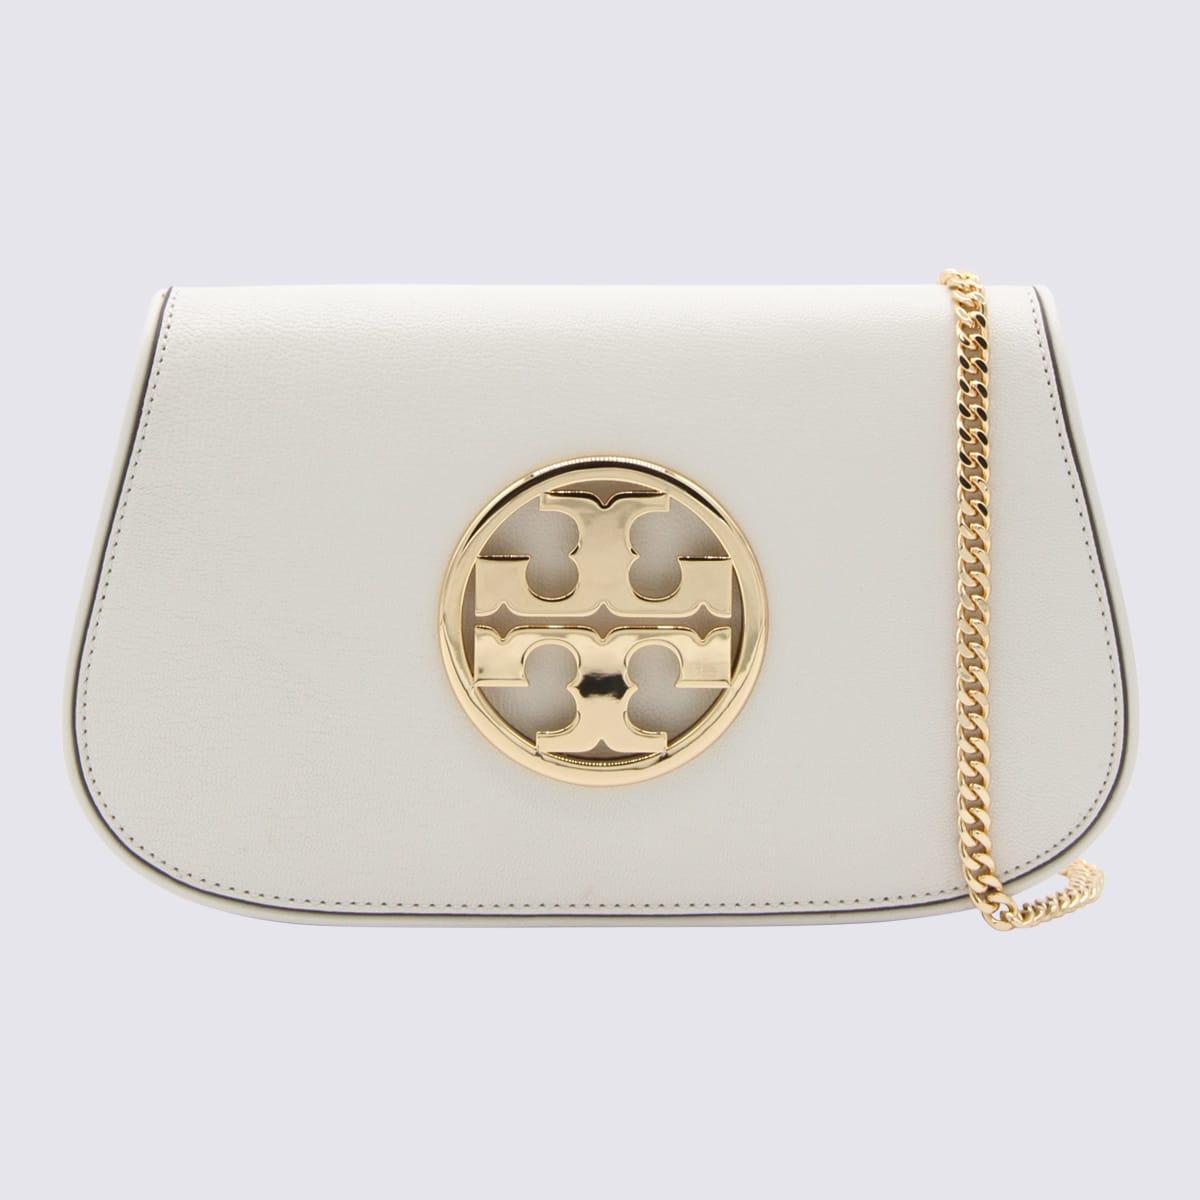 Tory Burch Ivory Leather Reva Shoulder Bag In White